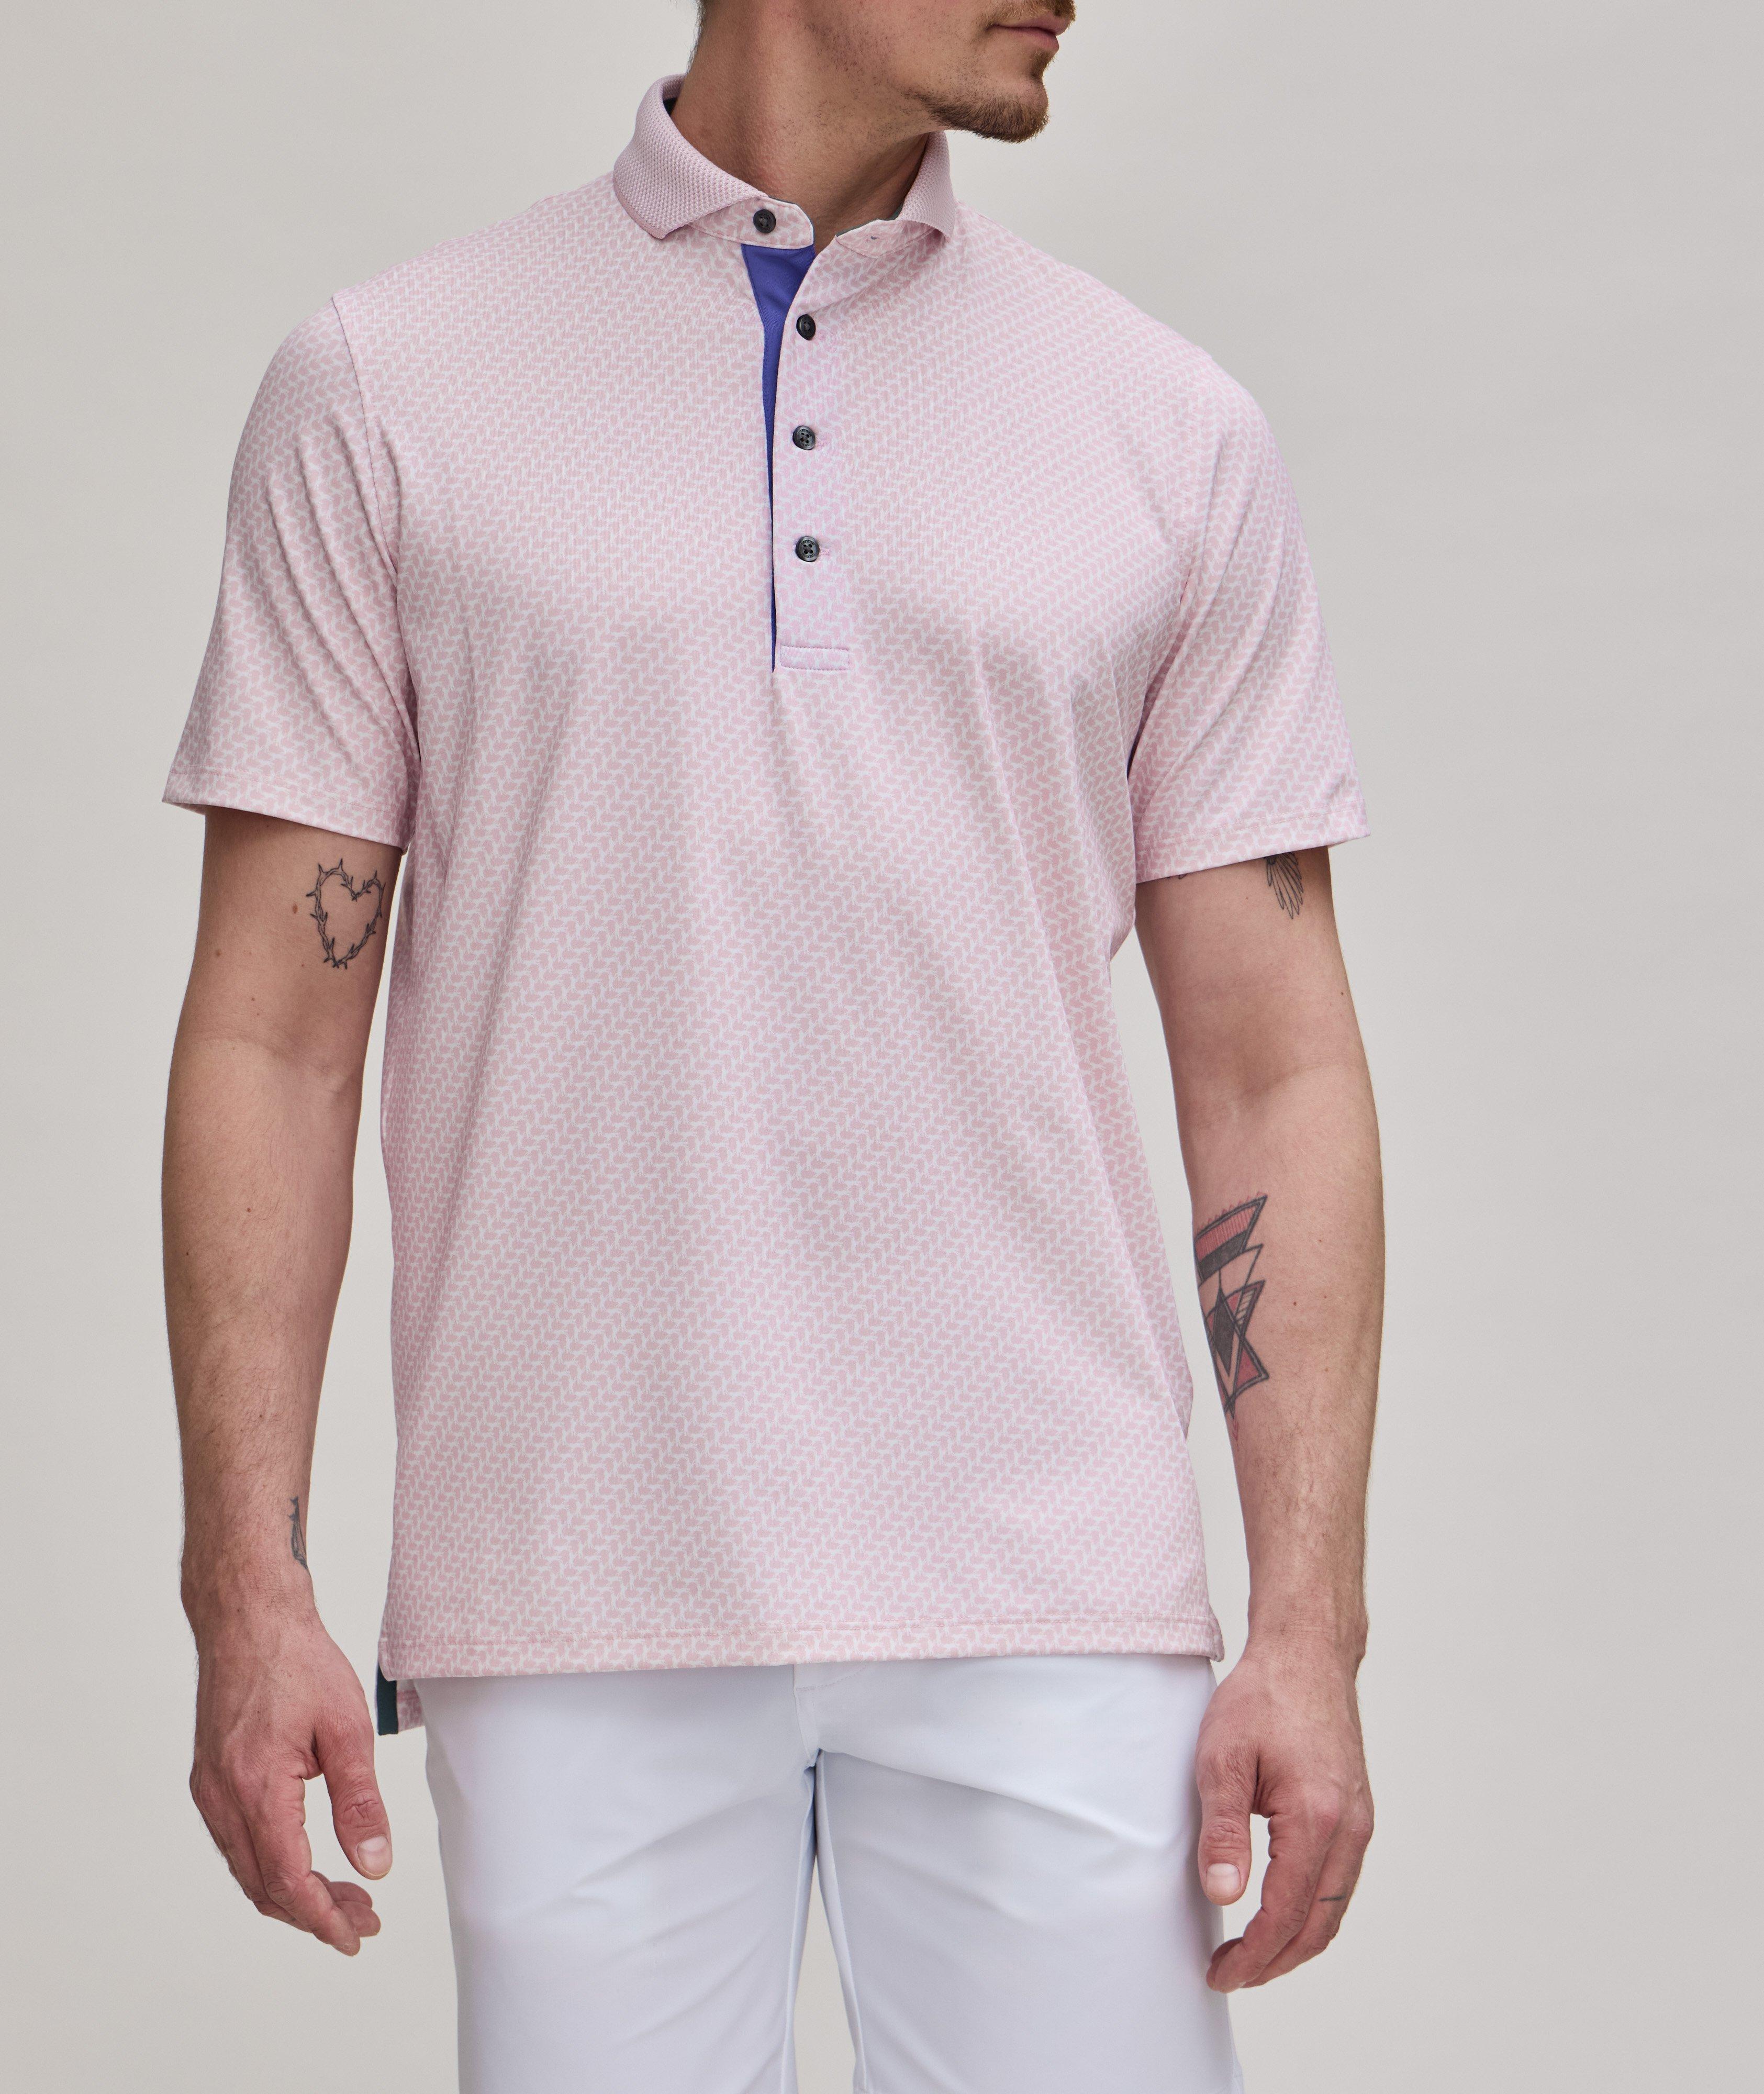 Abstract Pattern Polo